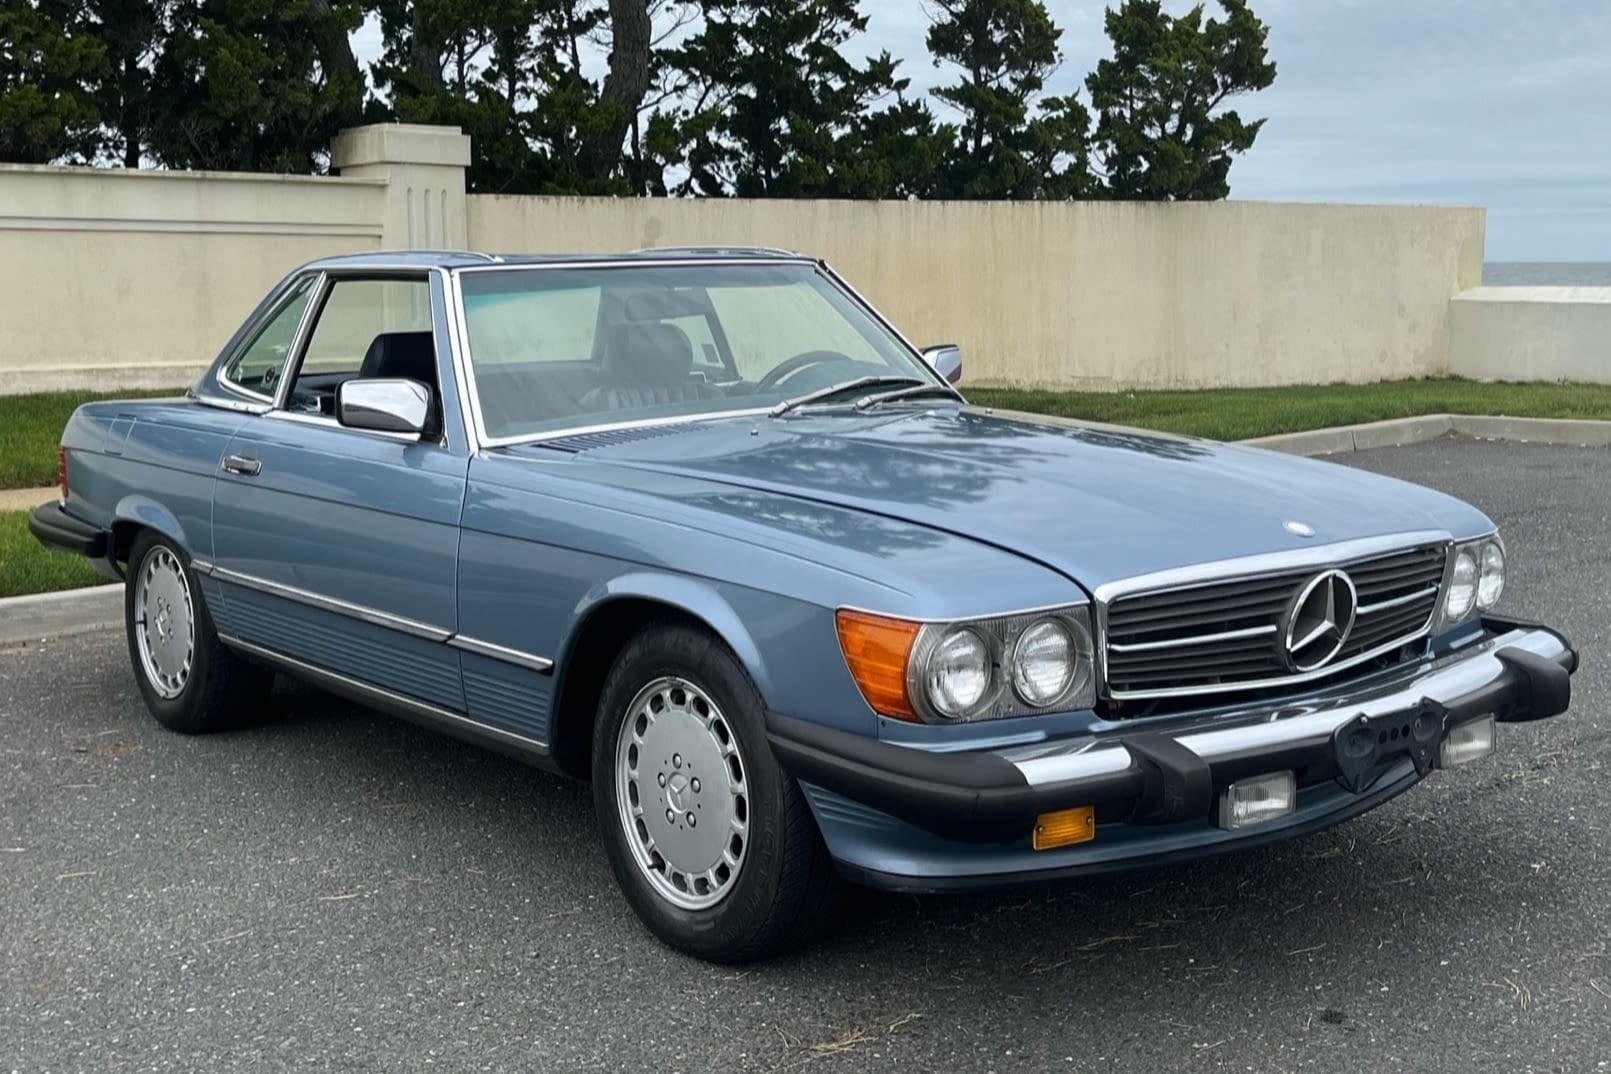 1988 Mercedes-Benz 560SL - 1988 Mercedes-Benz 560SL (Live Auction) - Used - VIN WDBBA48D0JA081046 - 118,800 Miles - 8 cyl - 2WD - Automatic - Coupe - Blue - Deal, NJ 07723, United States